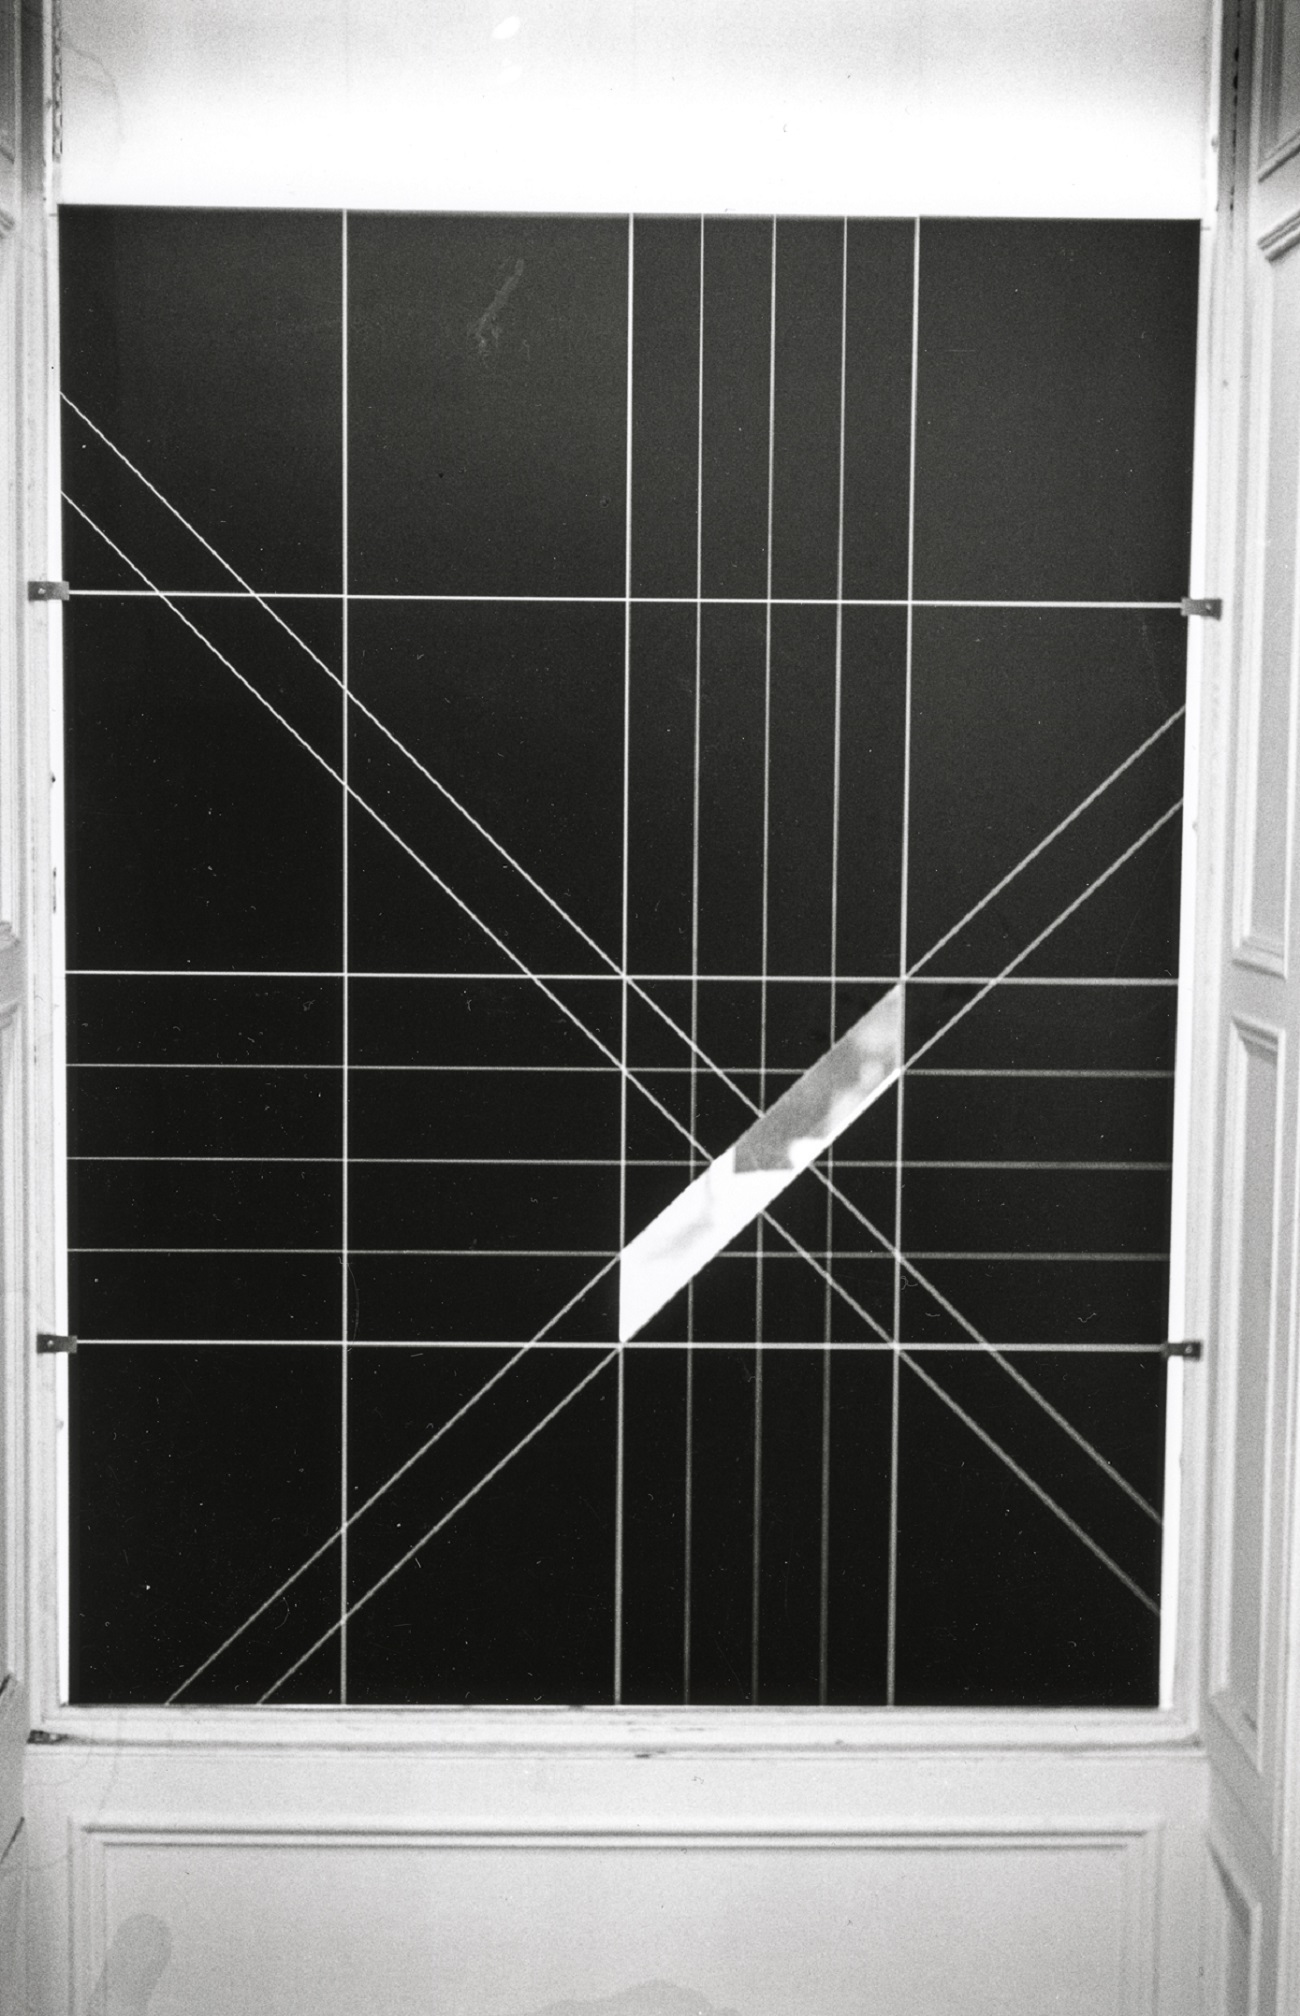 A dark-colored panel inscribed with light-colored gridlines and diagonals; this artwork has been placed over a window from the inside. A diagonal strip has been removed from the panel, admitting light from the outside.